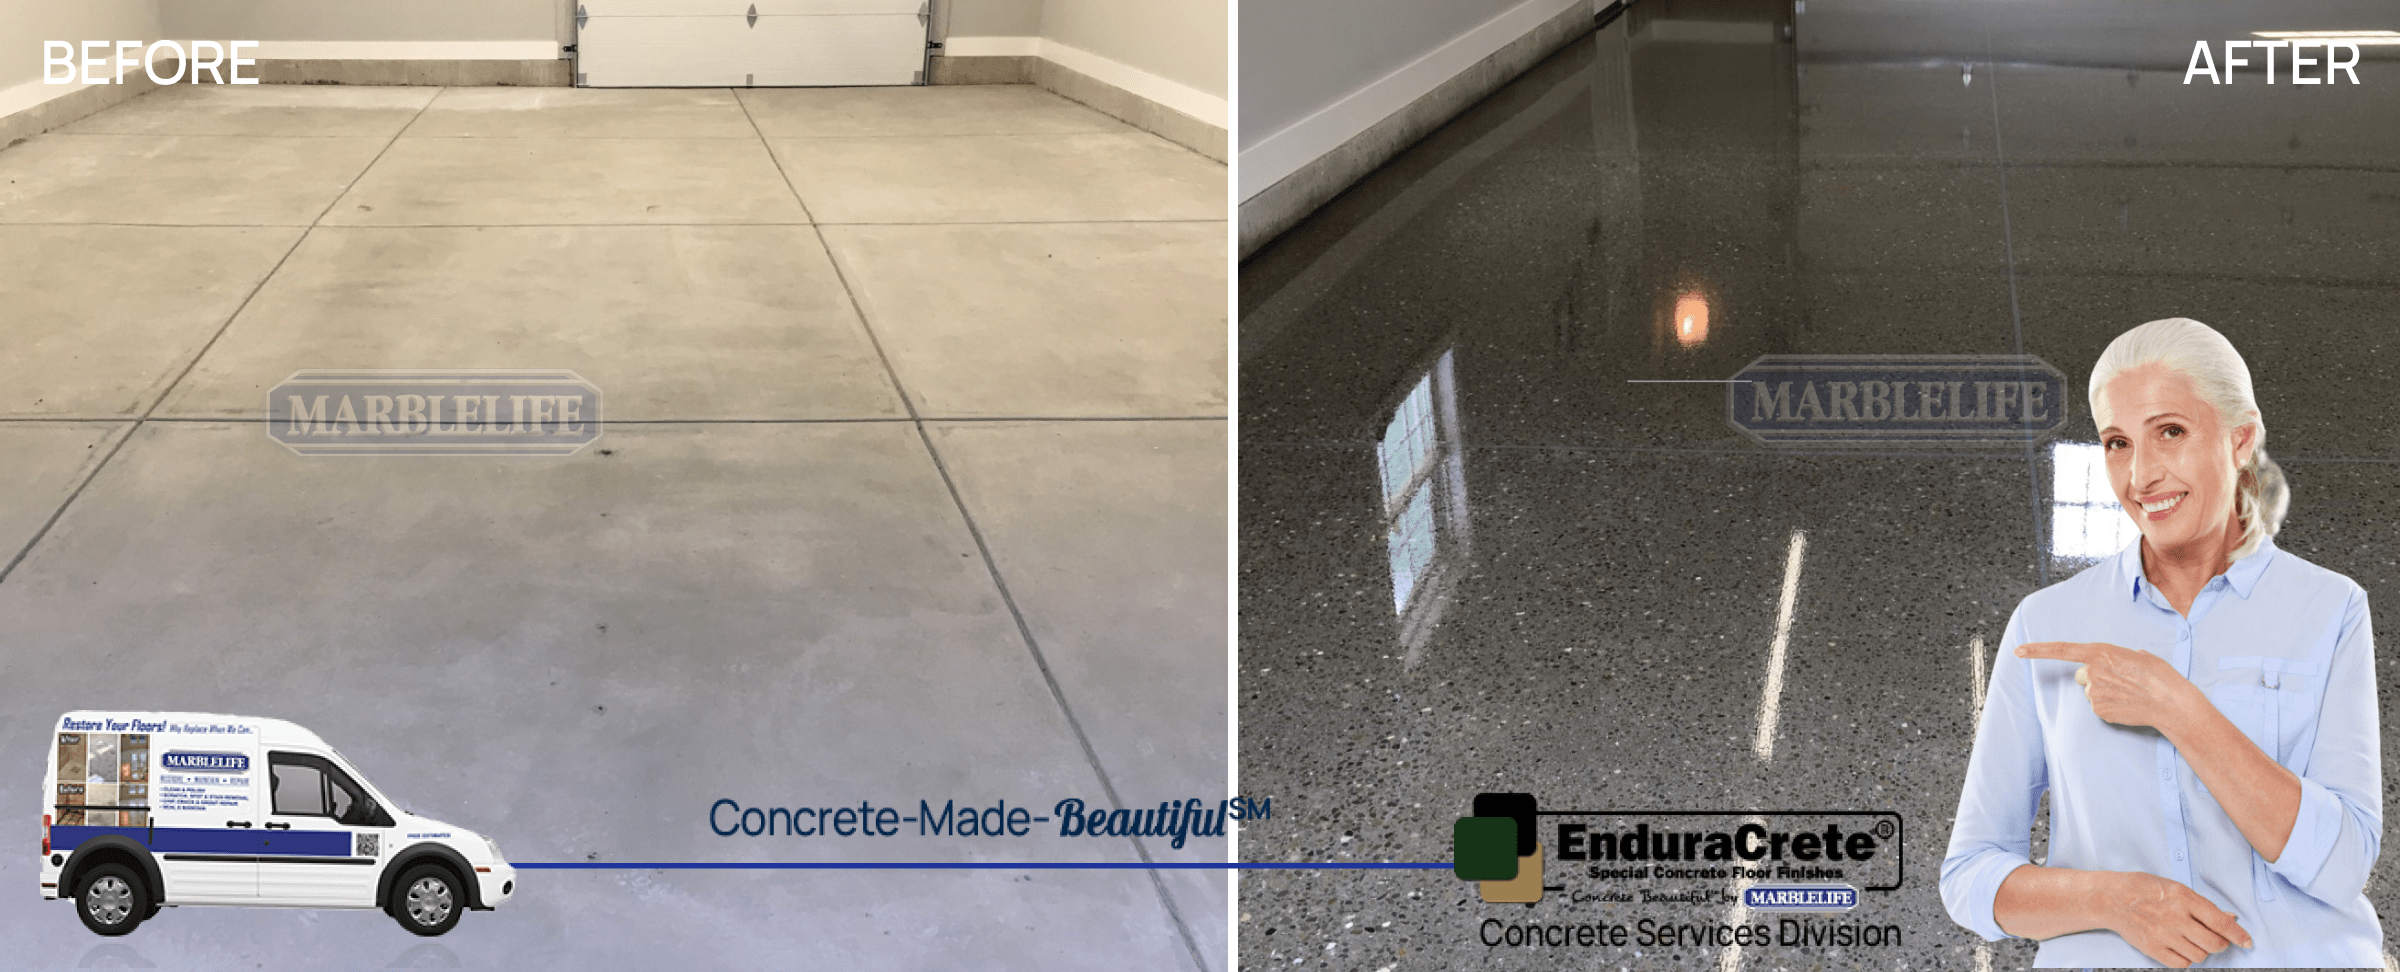 Terrazzo Floor Transformation by MARBLELIFE Experts